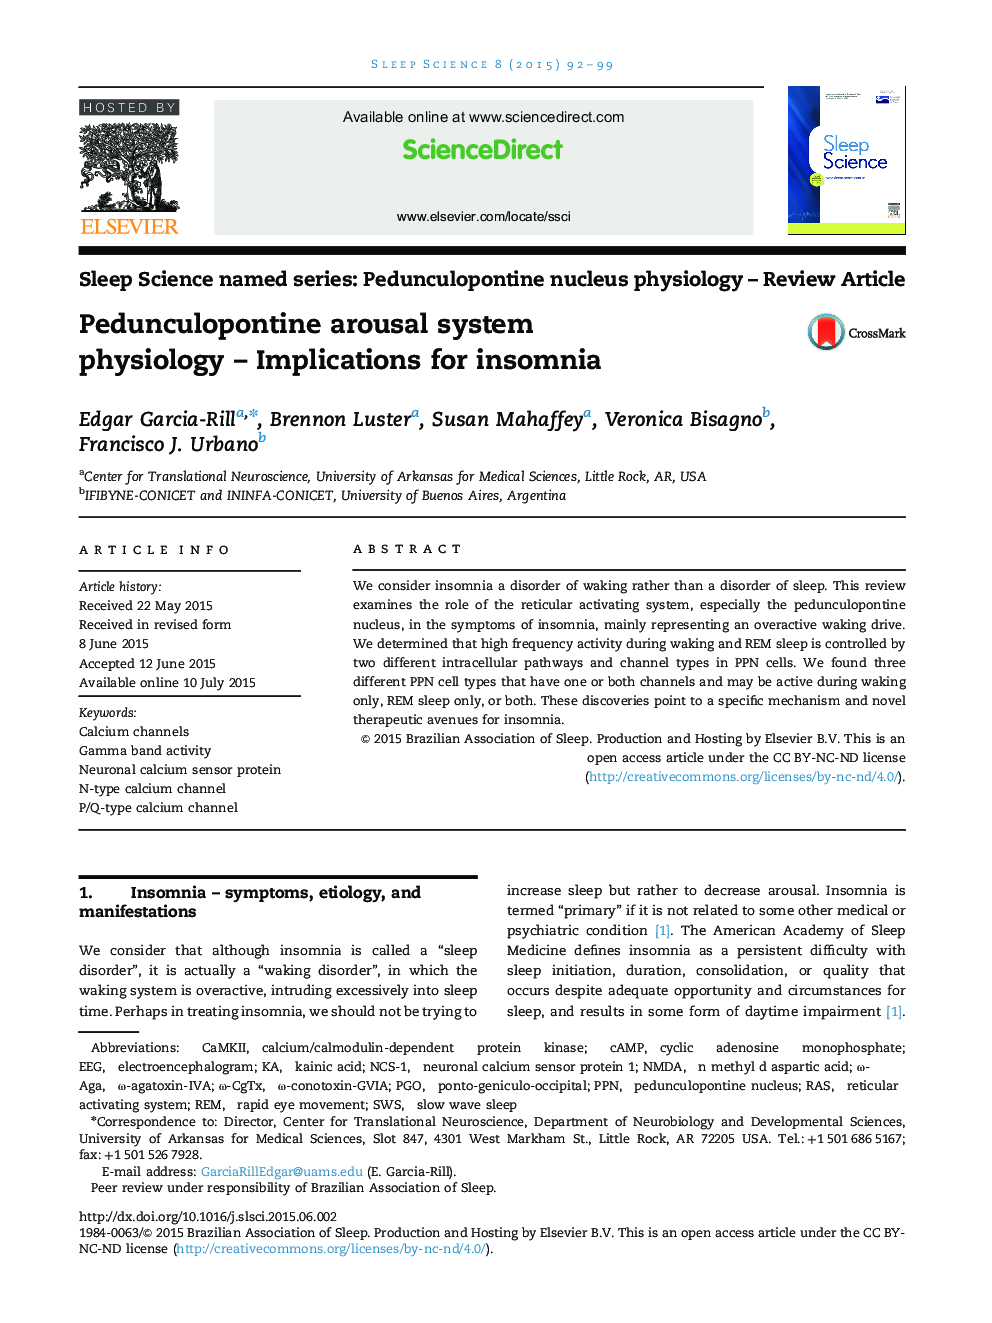 Pedunculopontine arousal system physiology – Implications for insomnia 